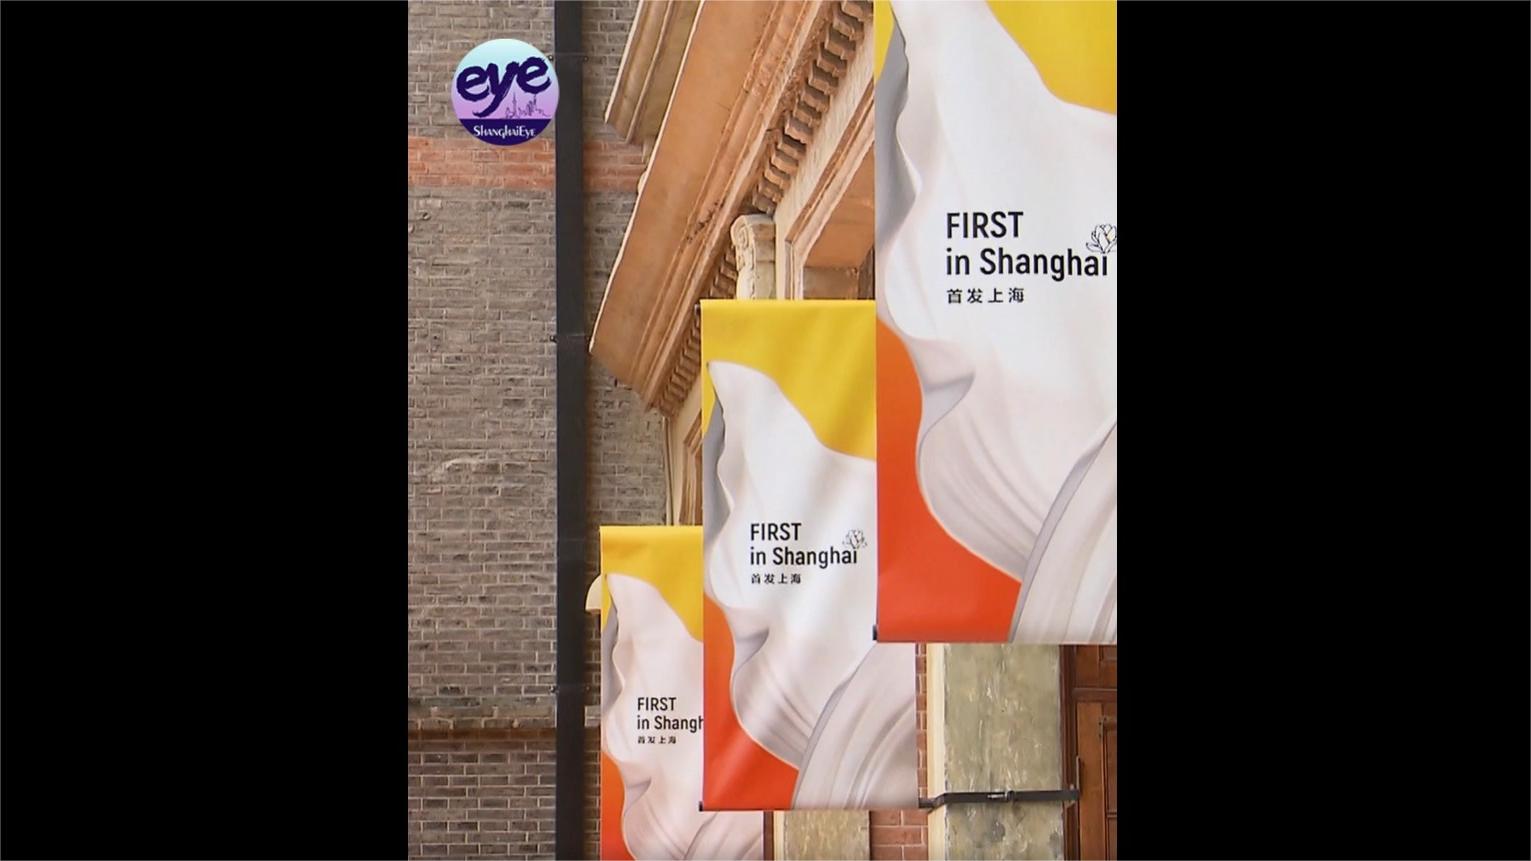 Shanghai attracts new brands, stores in bid to become next shopping hub